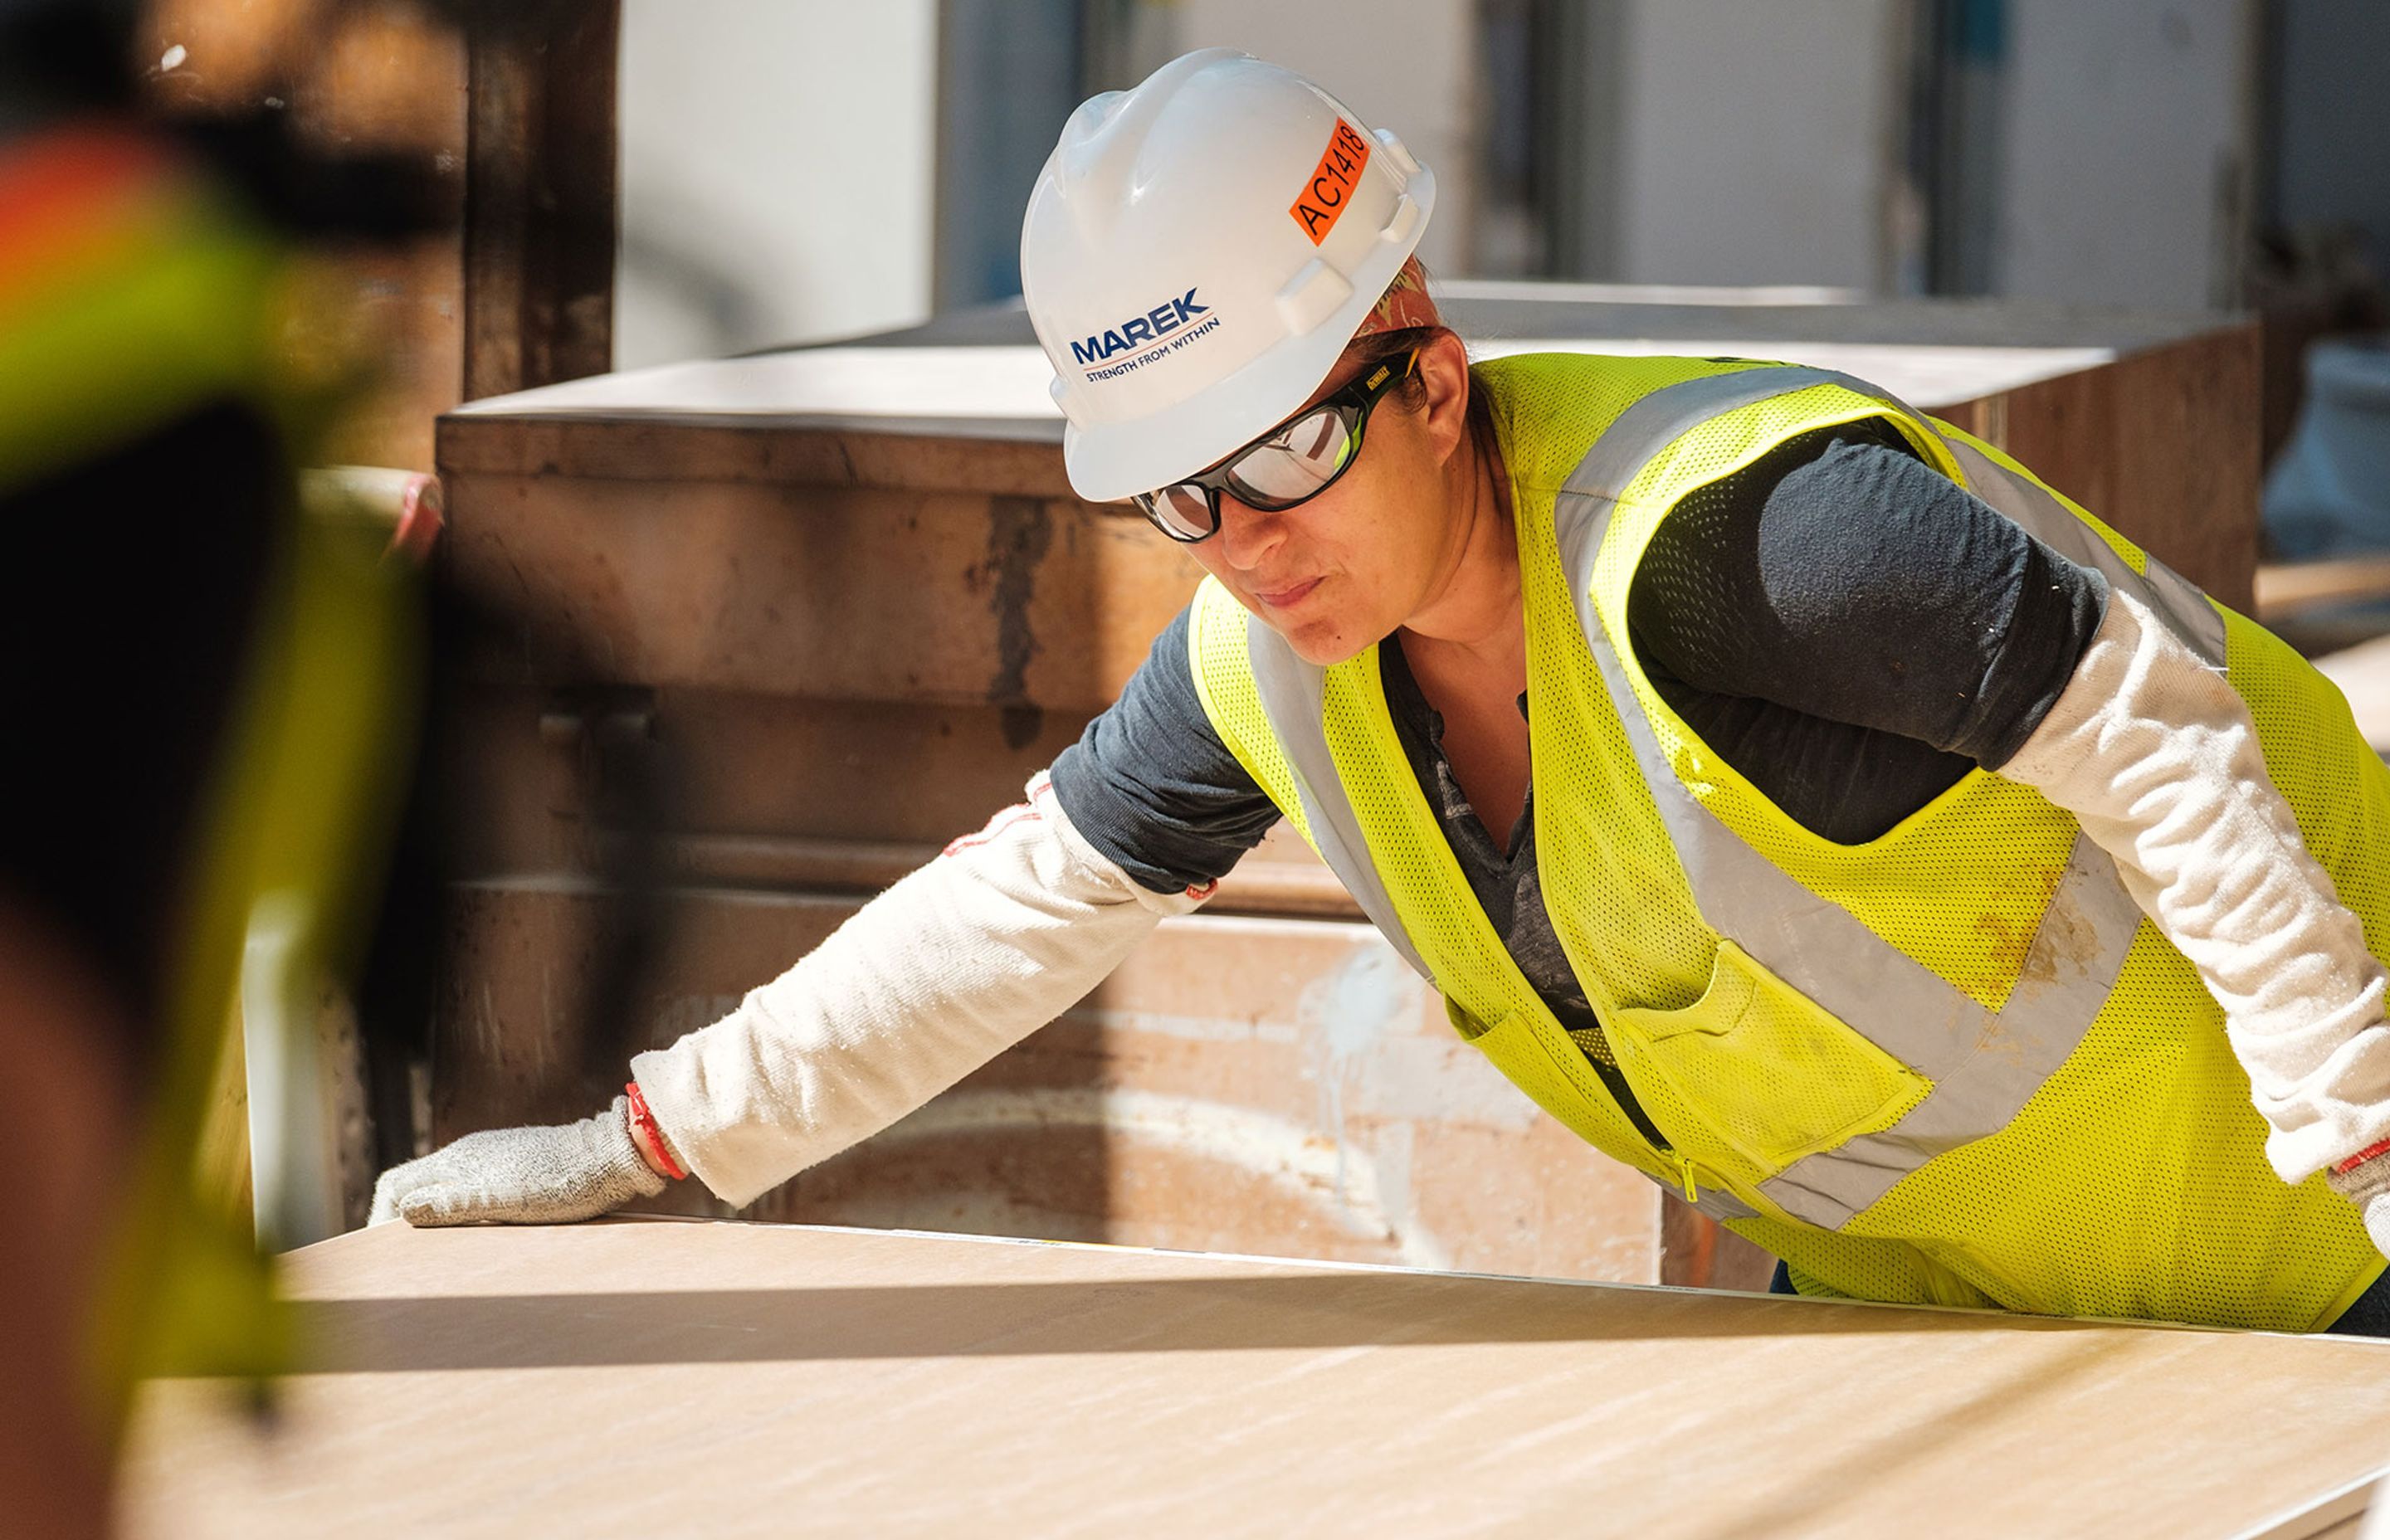 While a drop in new dwelling approvals was forecast, ongoing and new infrastructure projects should account for a modest increase for the sector by 2026.